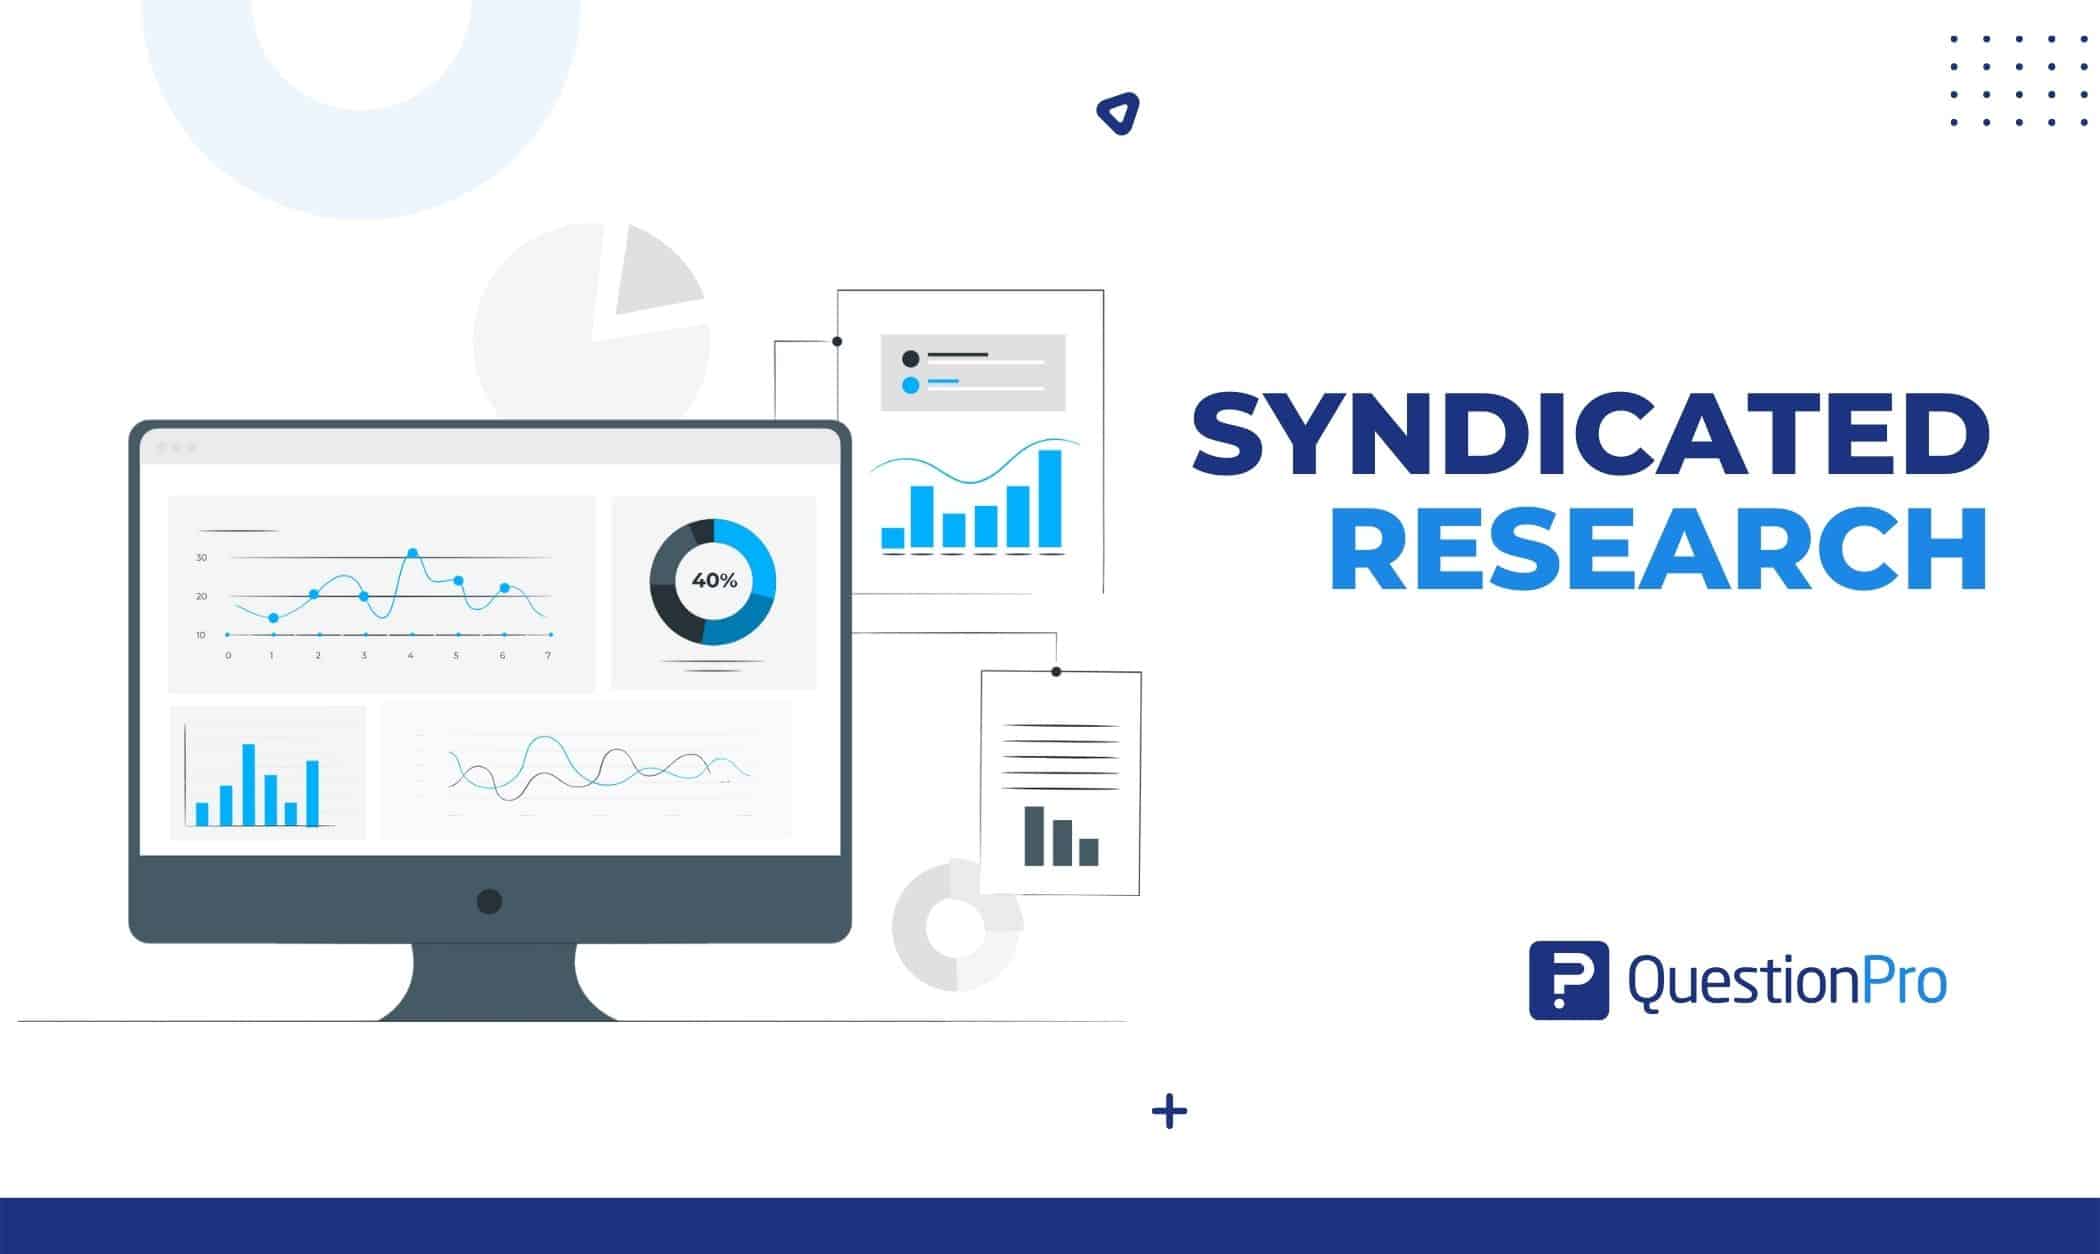 Syndicated research is a type of study financed and executed by a market research company without being done for a particular customer.